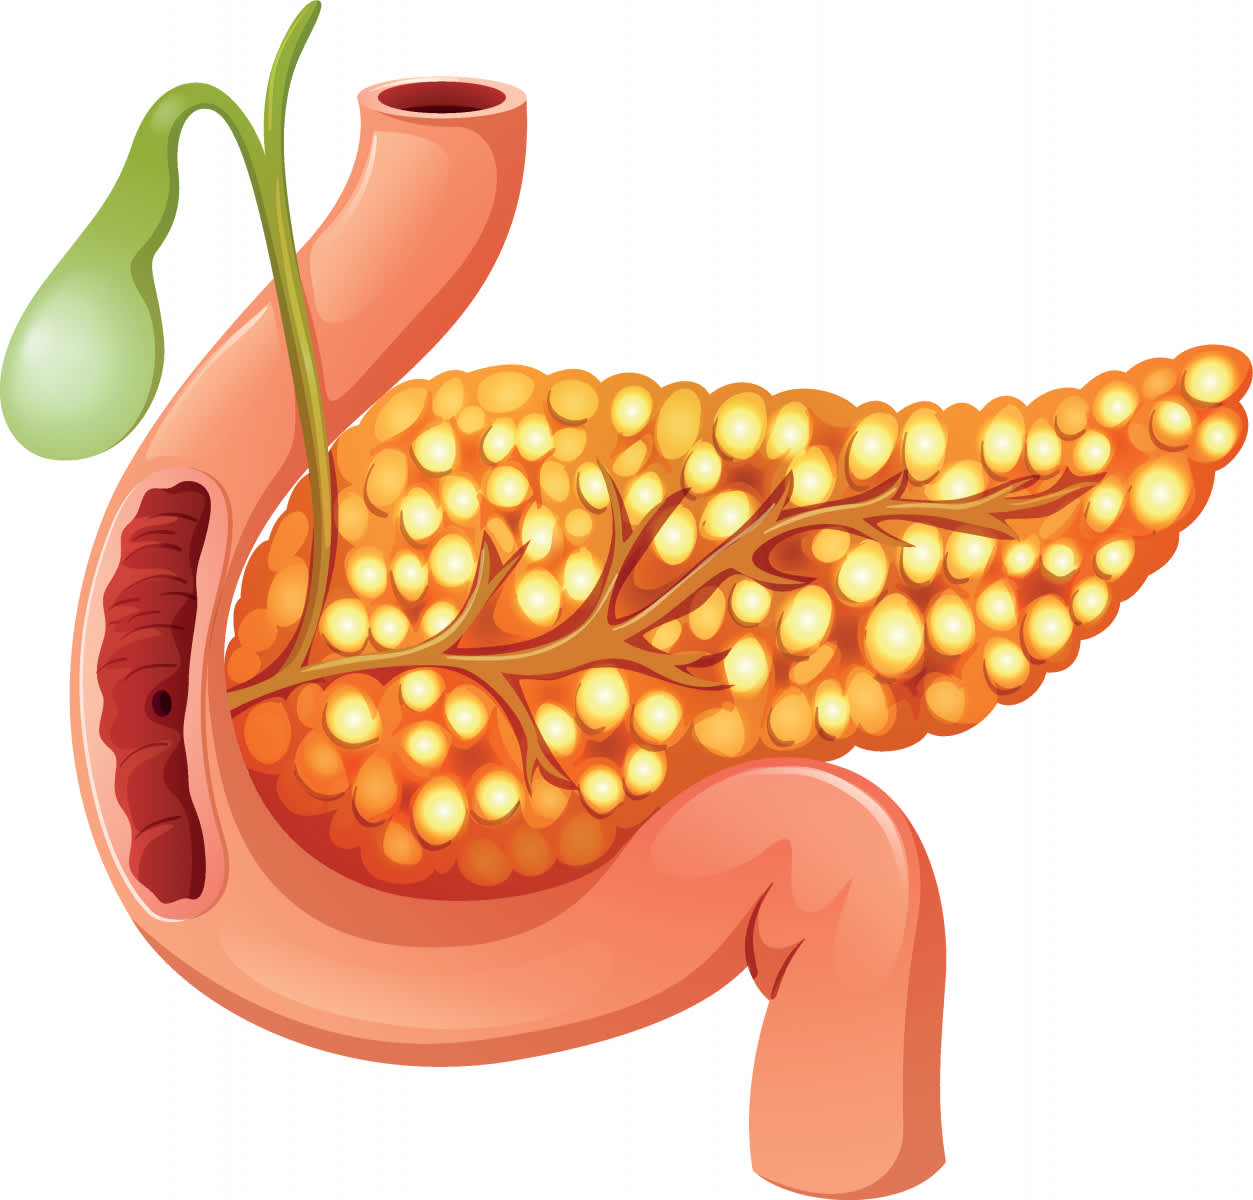 The image shows the structure of the pancreas. The pancreas is a reddish organ located in the abdominal cavity and connected to the duodenum.